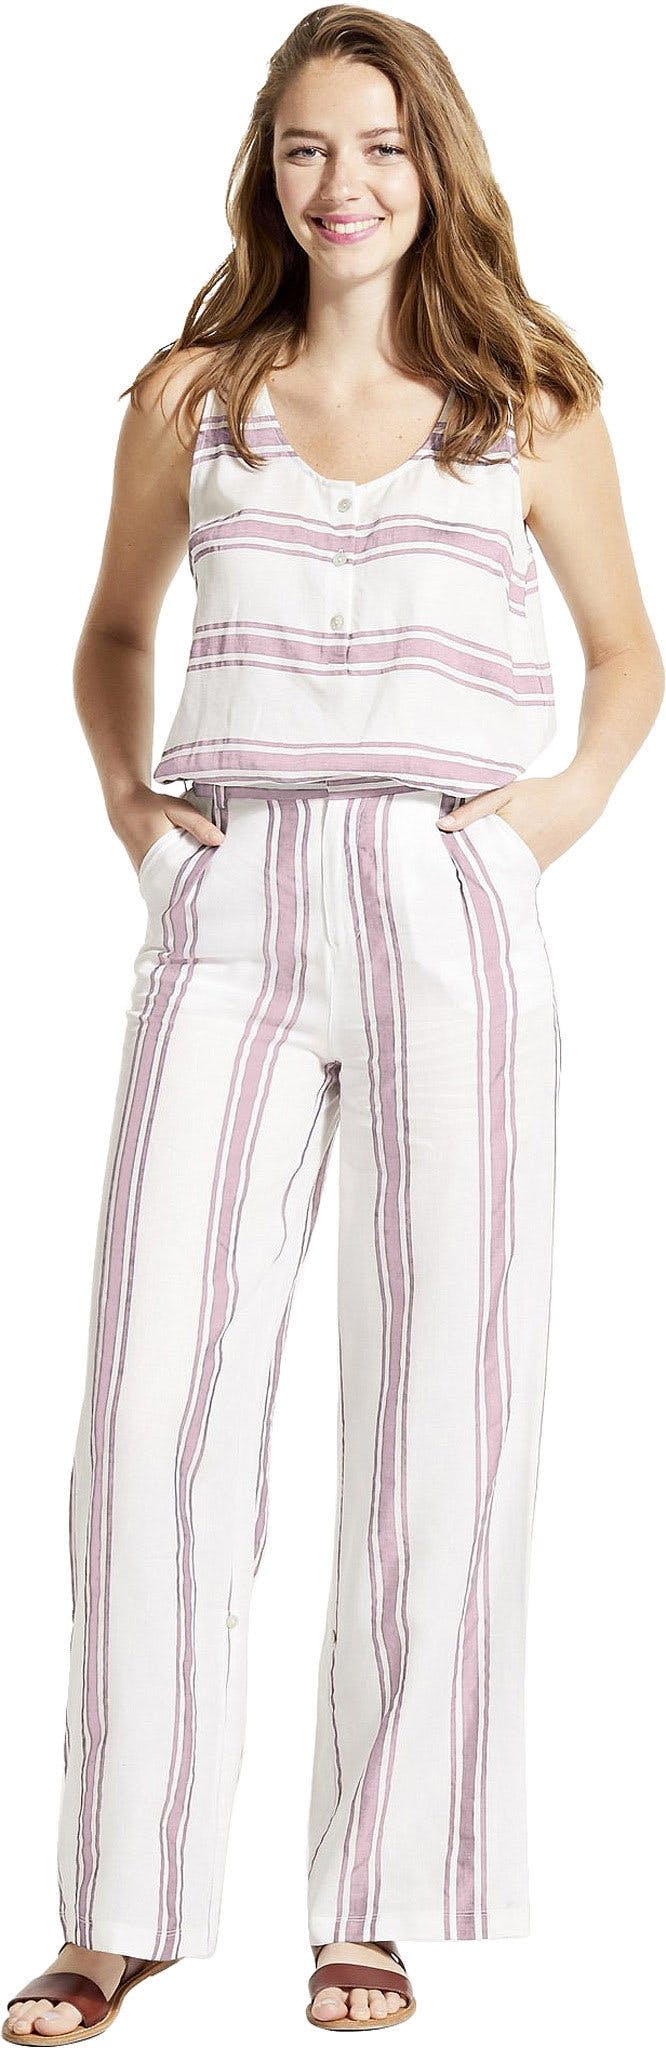 Product image for LEV Pants - Women's